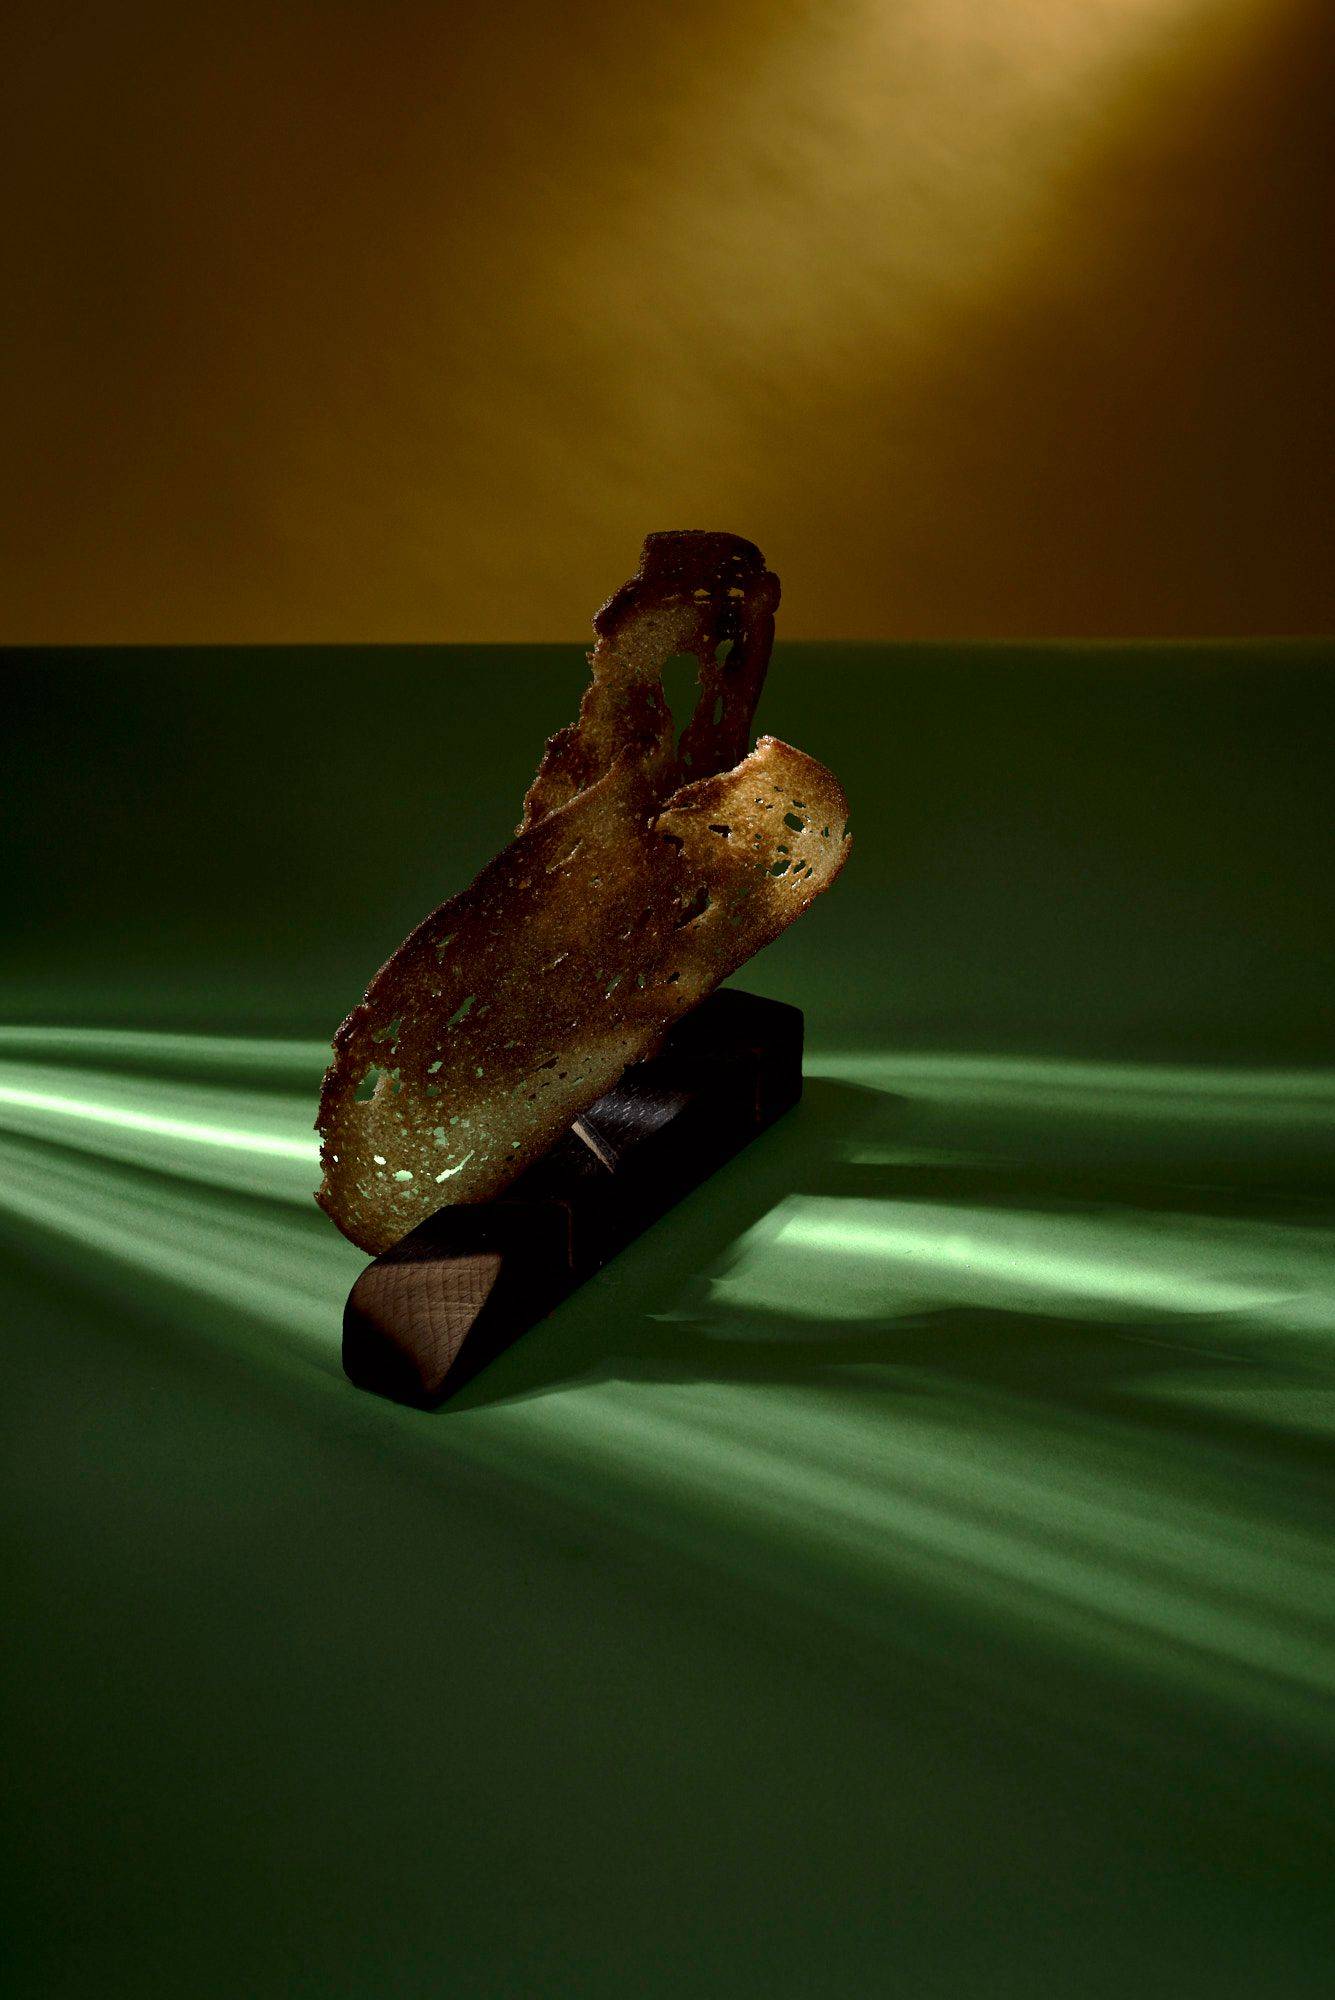 sourdough bread crisps on a wooden stand with green yellow background